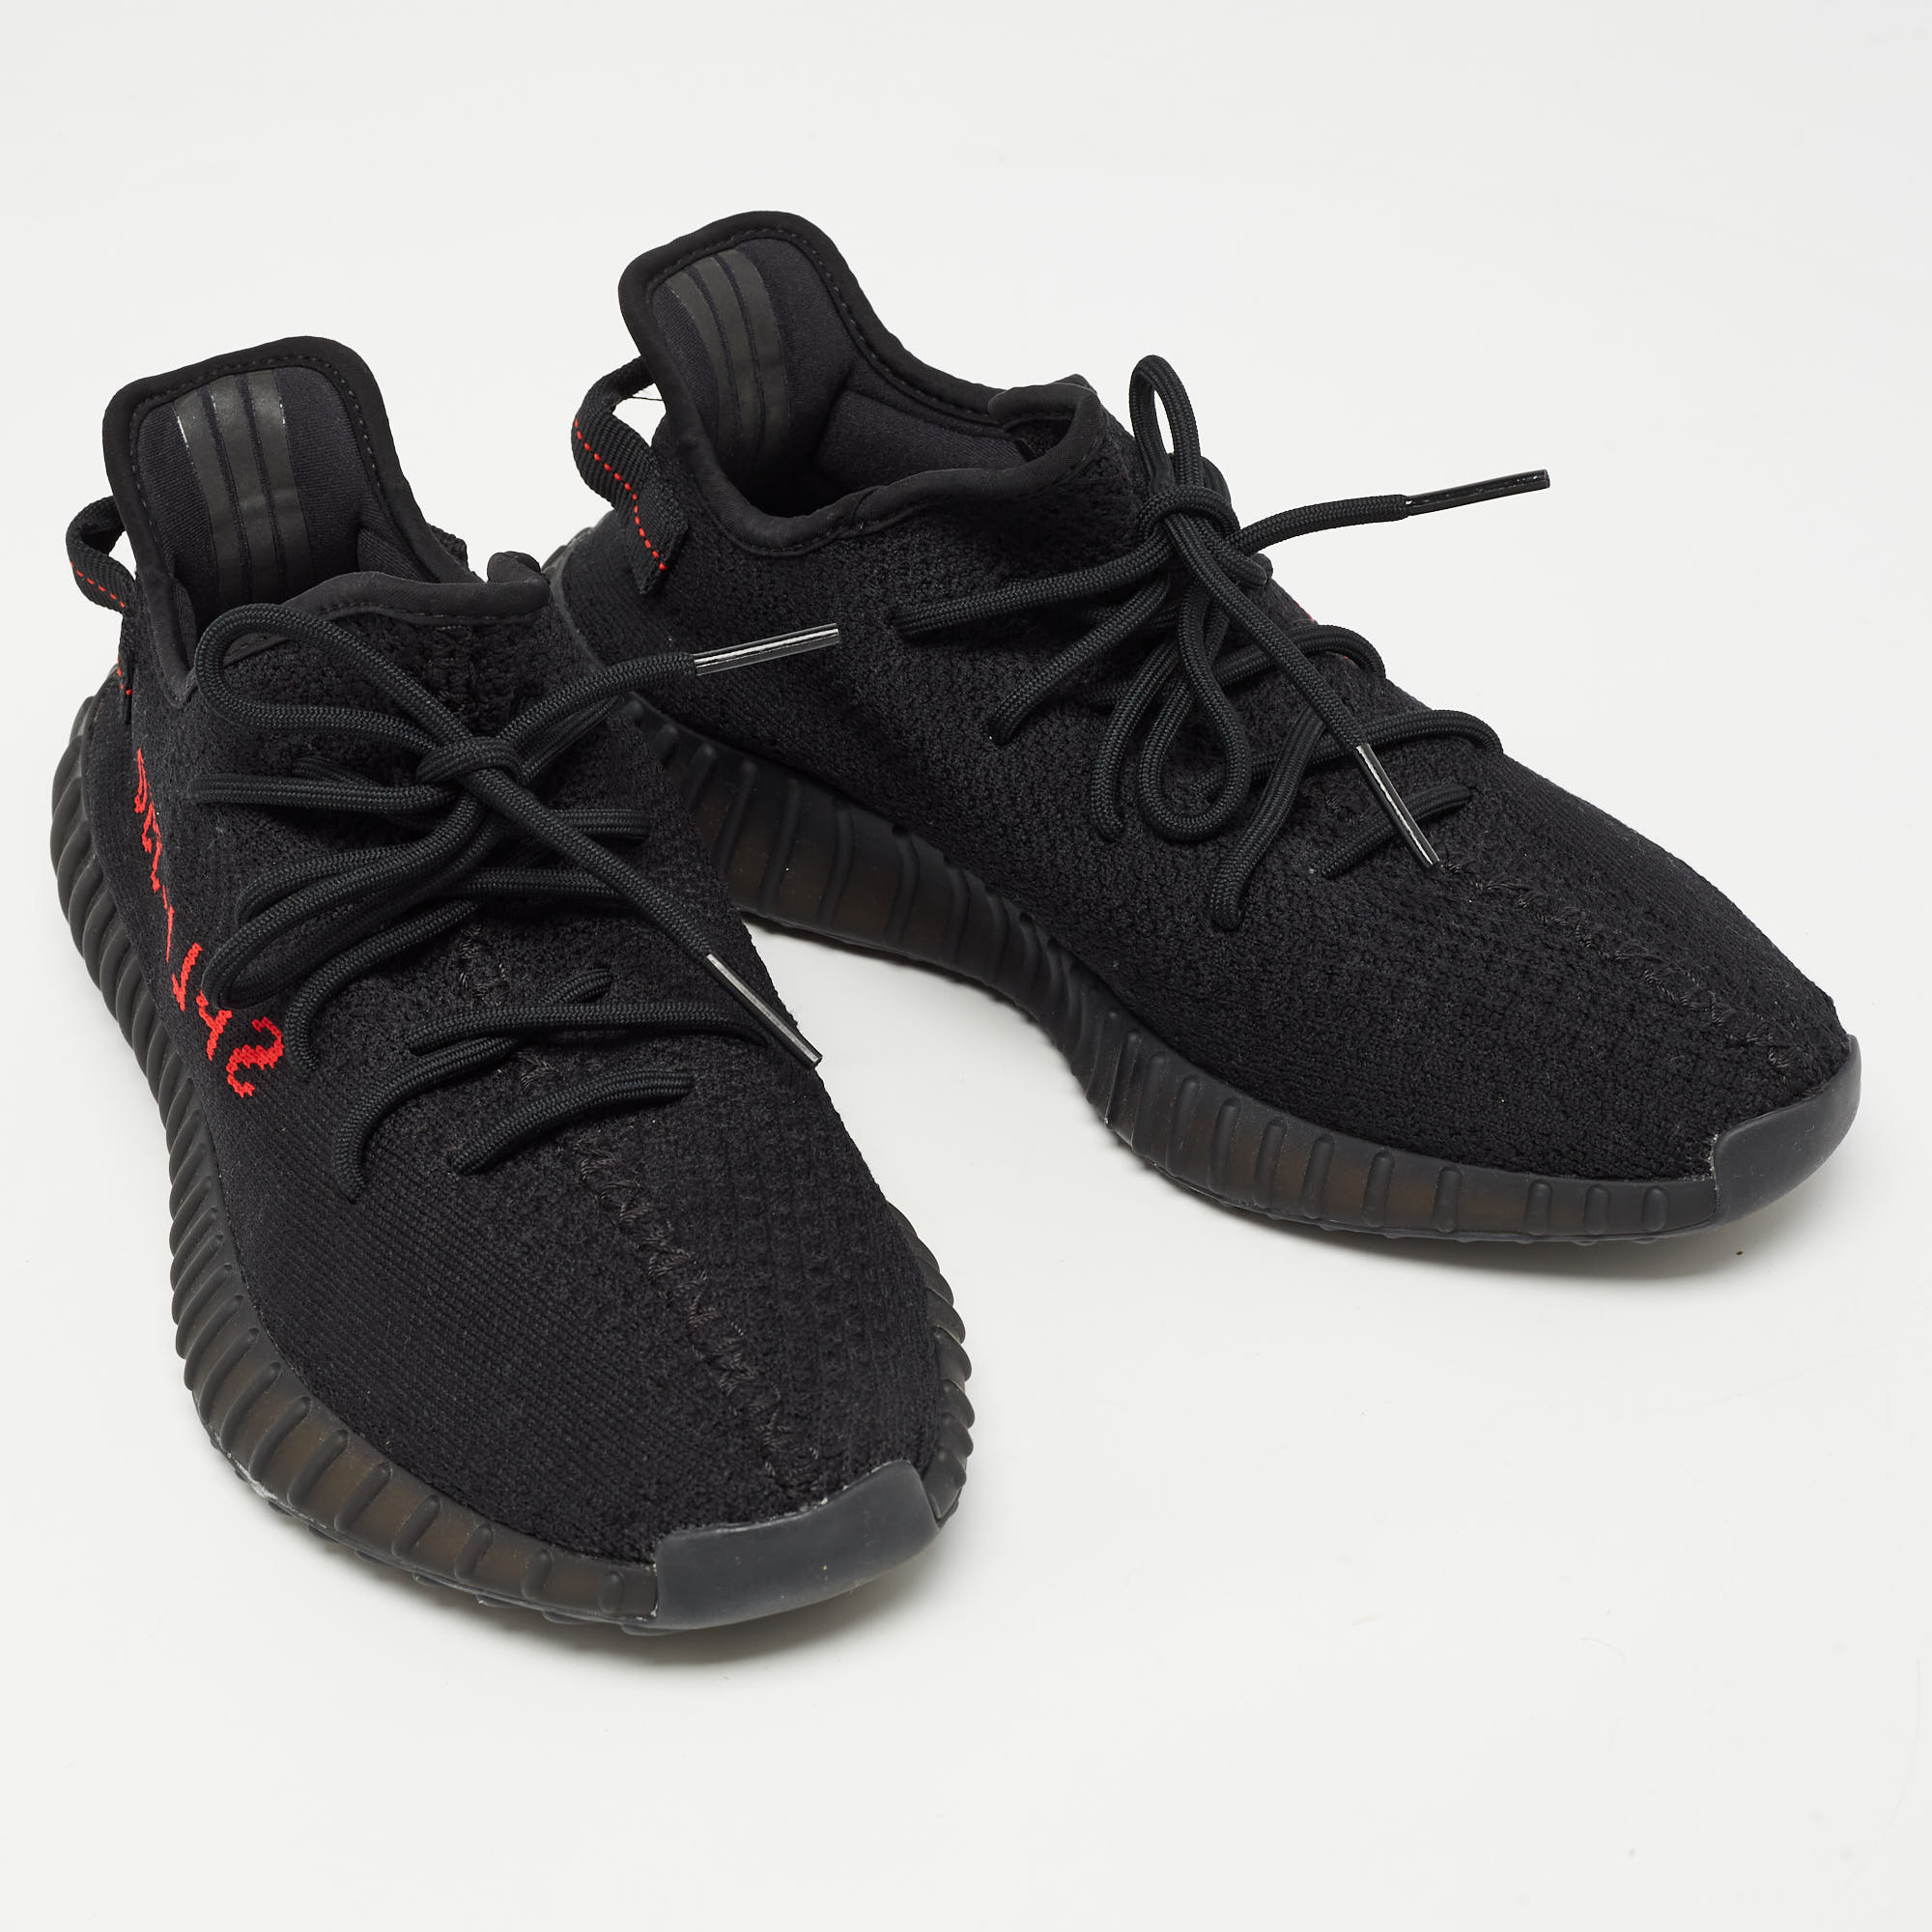 Yeezy X Adidas Black/Red Knit Fabric Boost 350 V2 Bred Sneakers Size 44